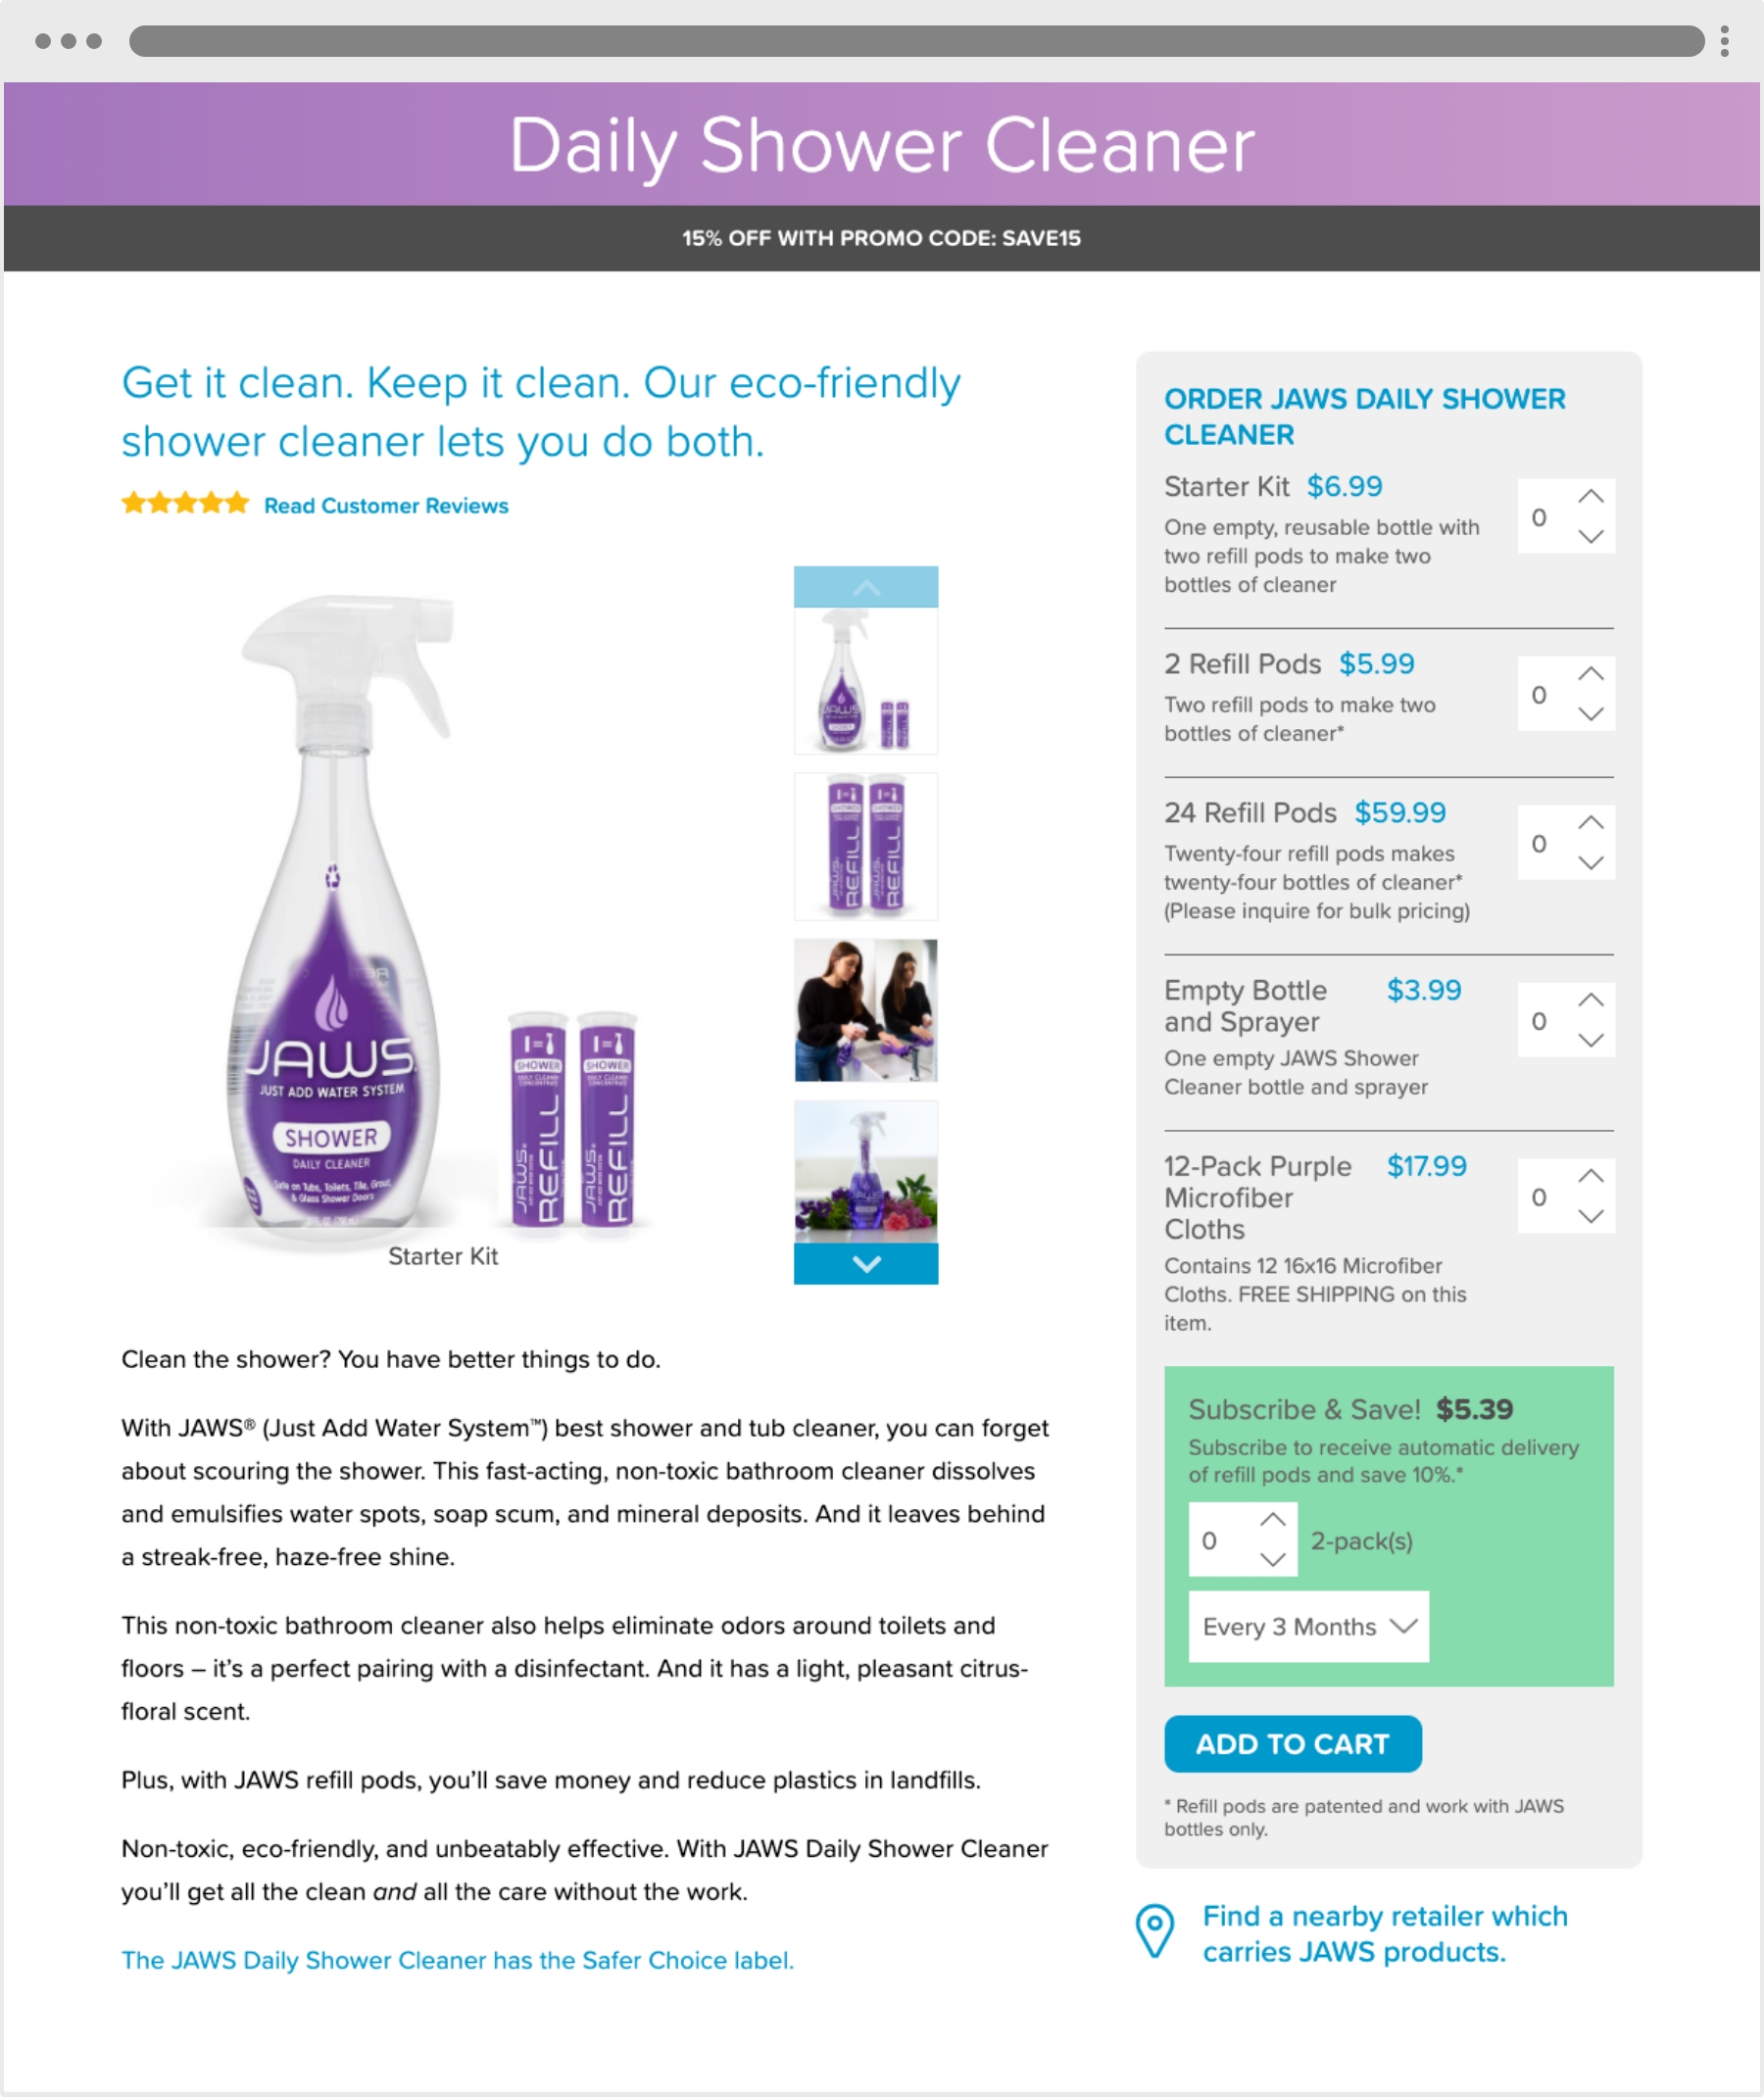 JAWS Daily Shower Cleaner Product Page